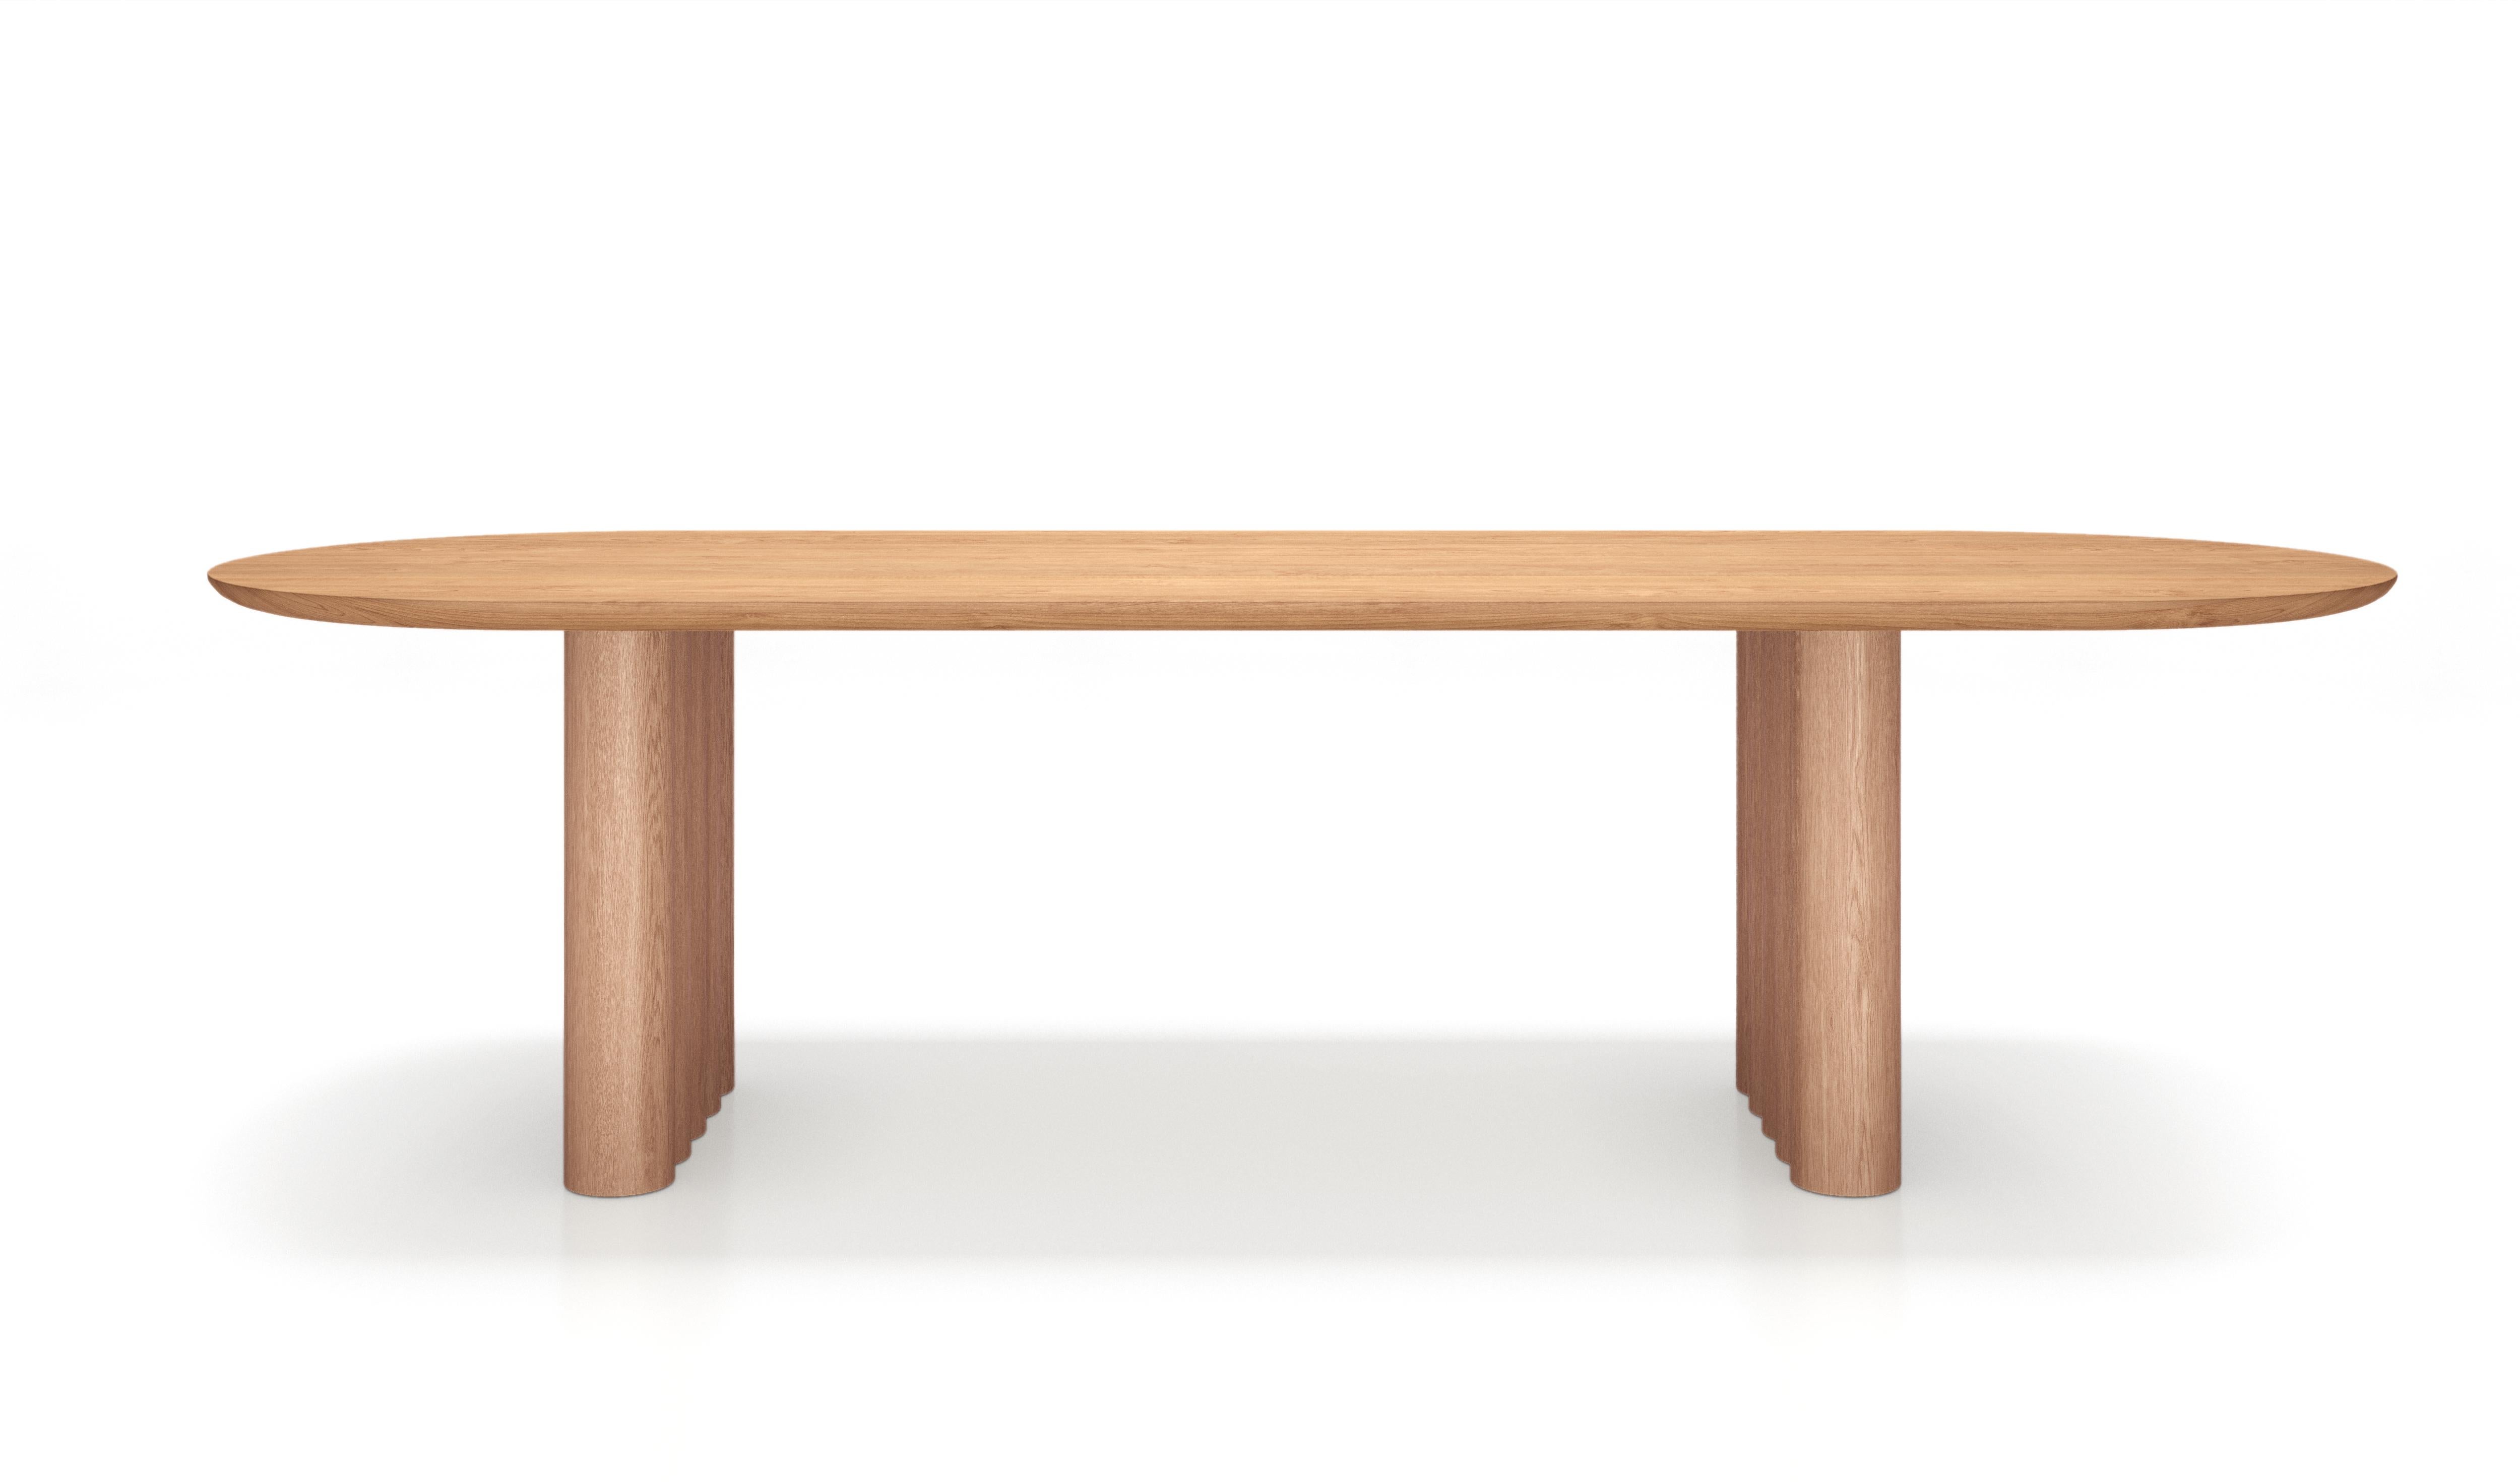 PLUSH dining table, oval, 370 cm.
Solid wood table top and legs. Handmade in Denmark. 
Signed by Jacob Plejdrup for DK3

Table's height: 72 or 74 cm
Table top’s thickness: 40mm
Legs width: 150mm

Table top dimensions:
– 200 x 100 cm
– 240 x 100 cm
–